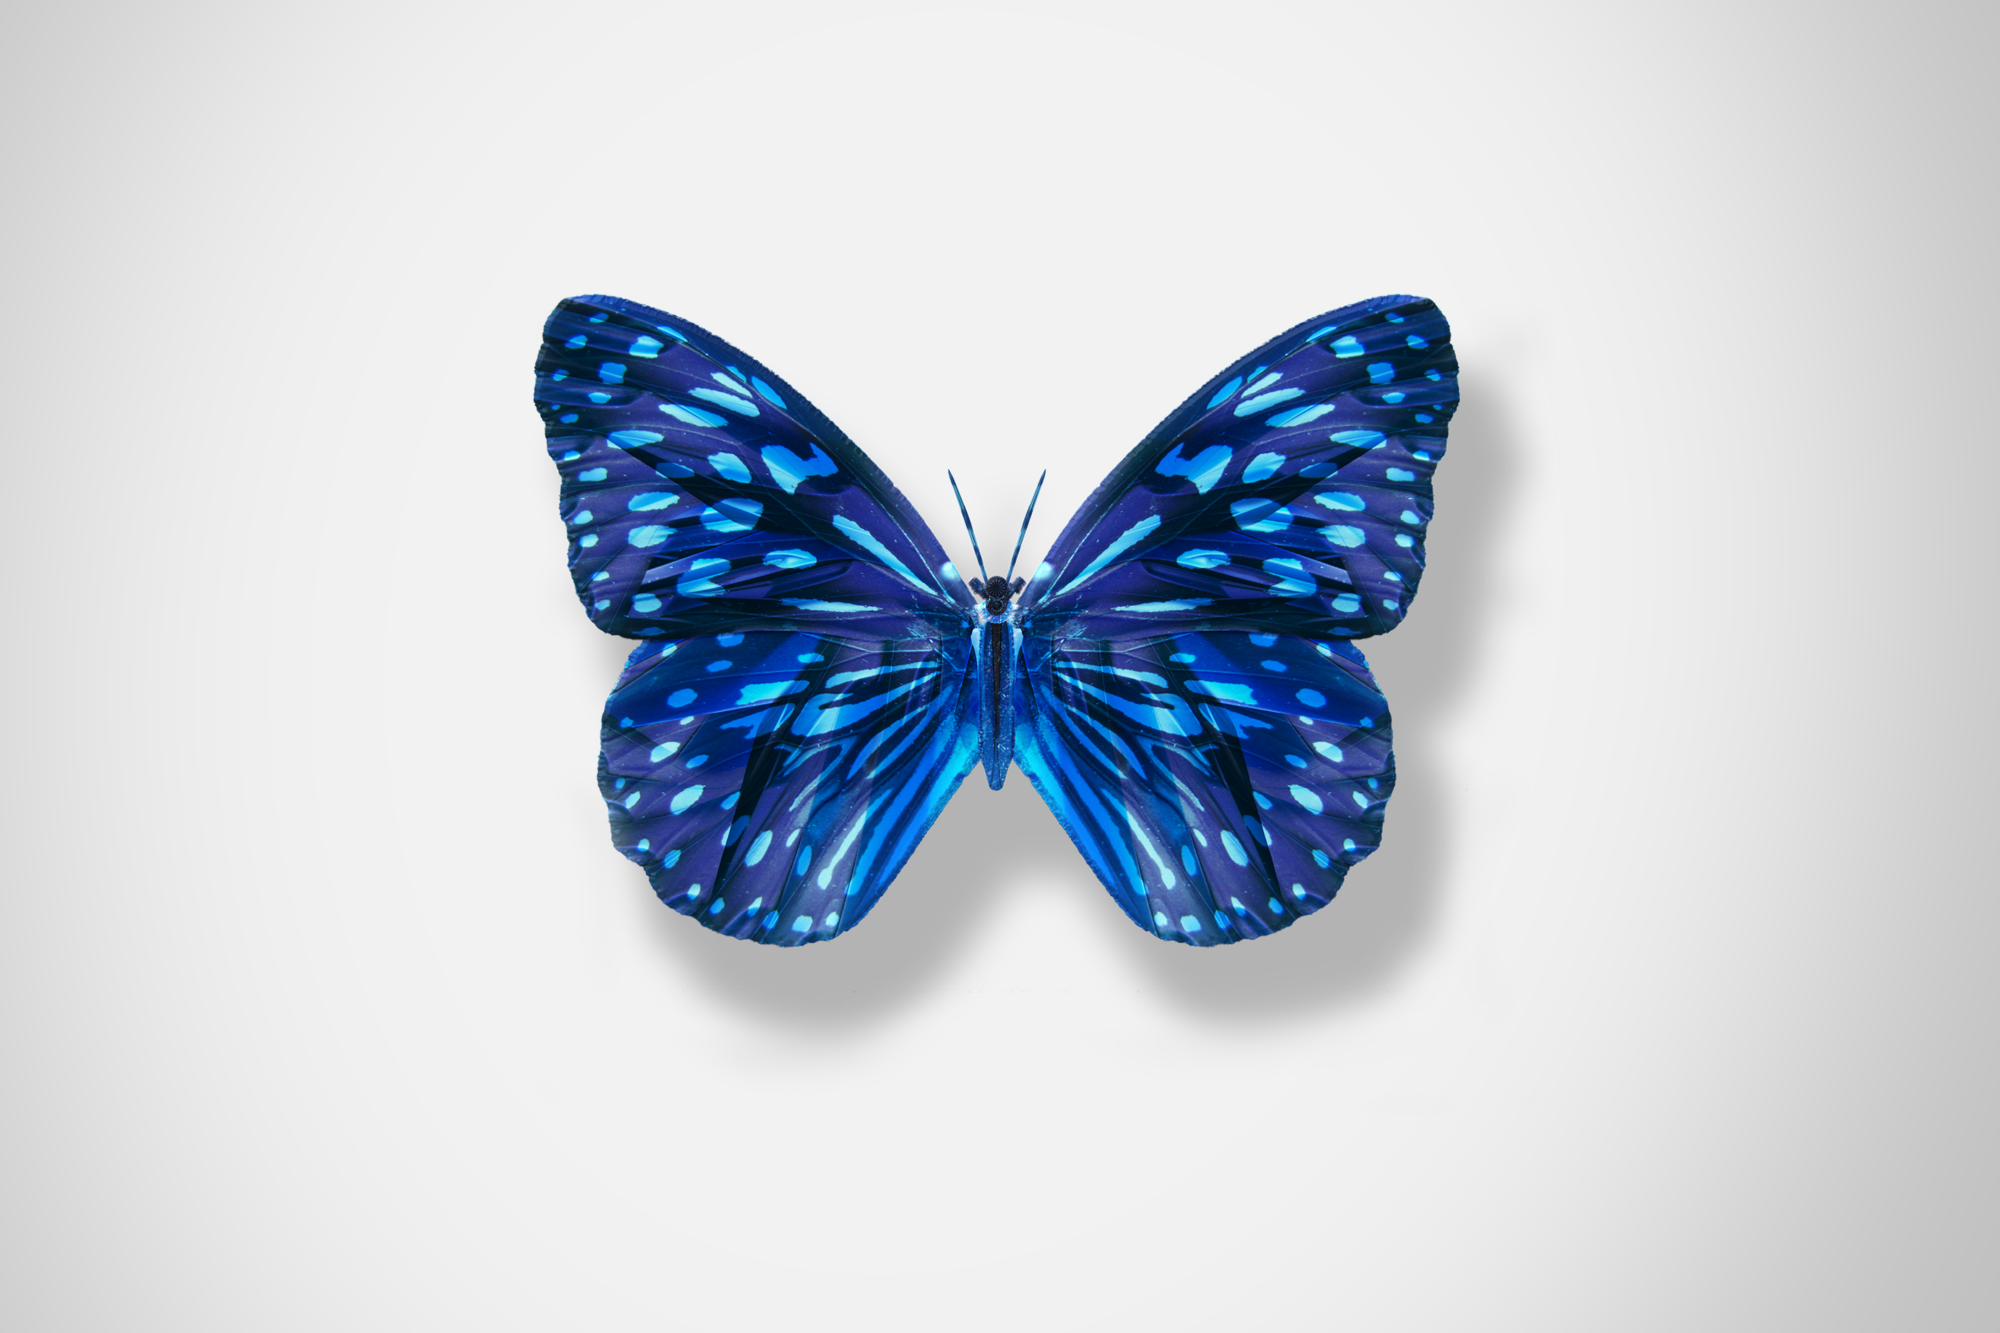 Ford_Butterflies_Concept_The_Beauty_Of_Change_DKLG_Design_001.png